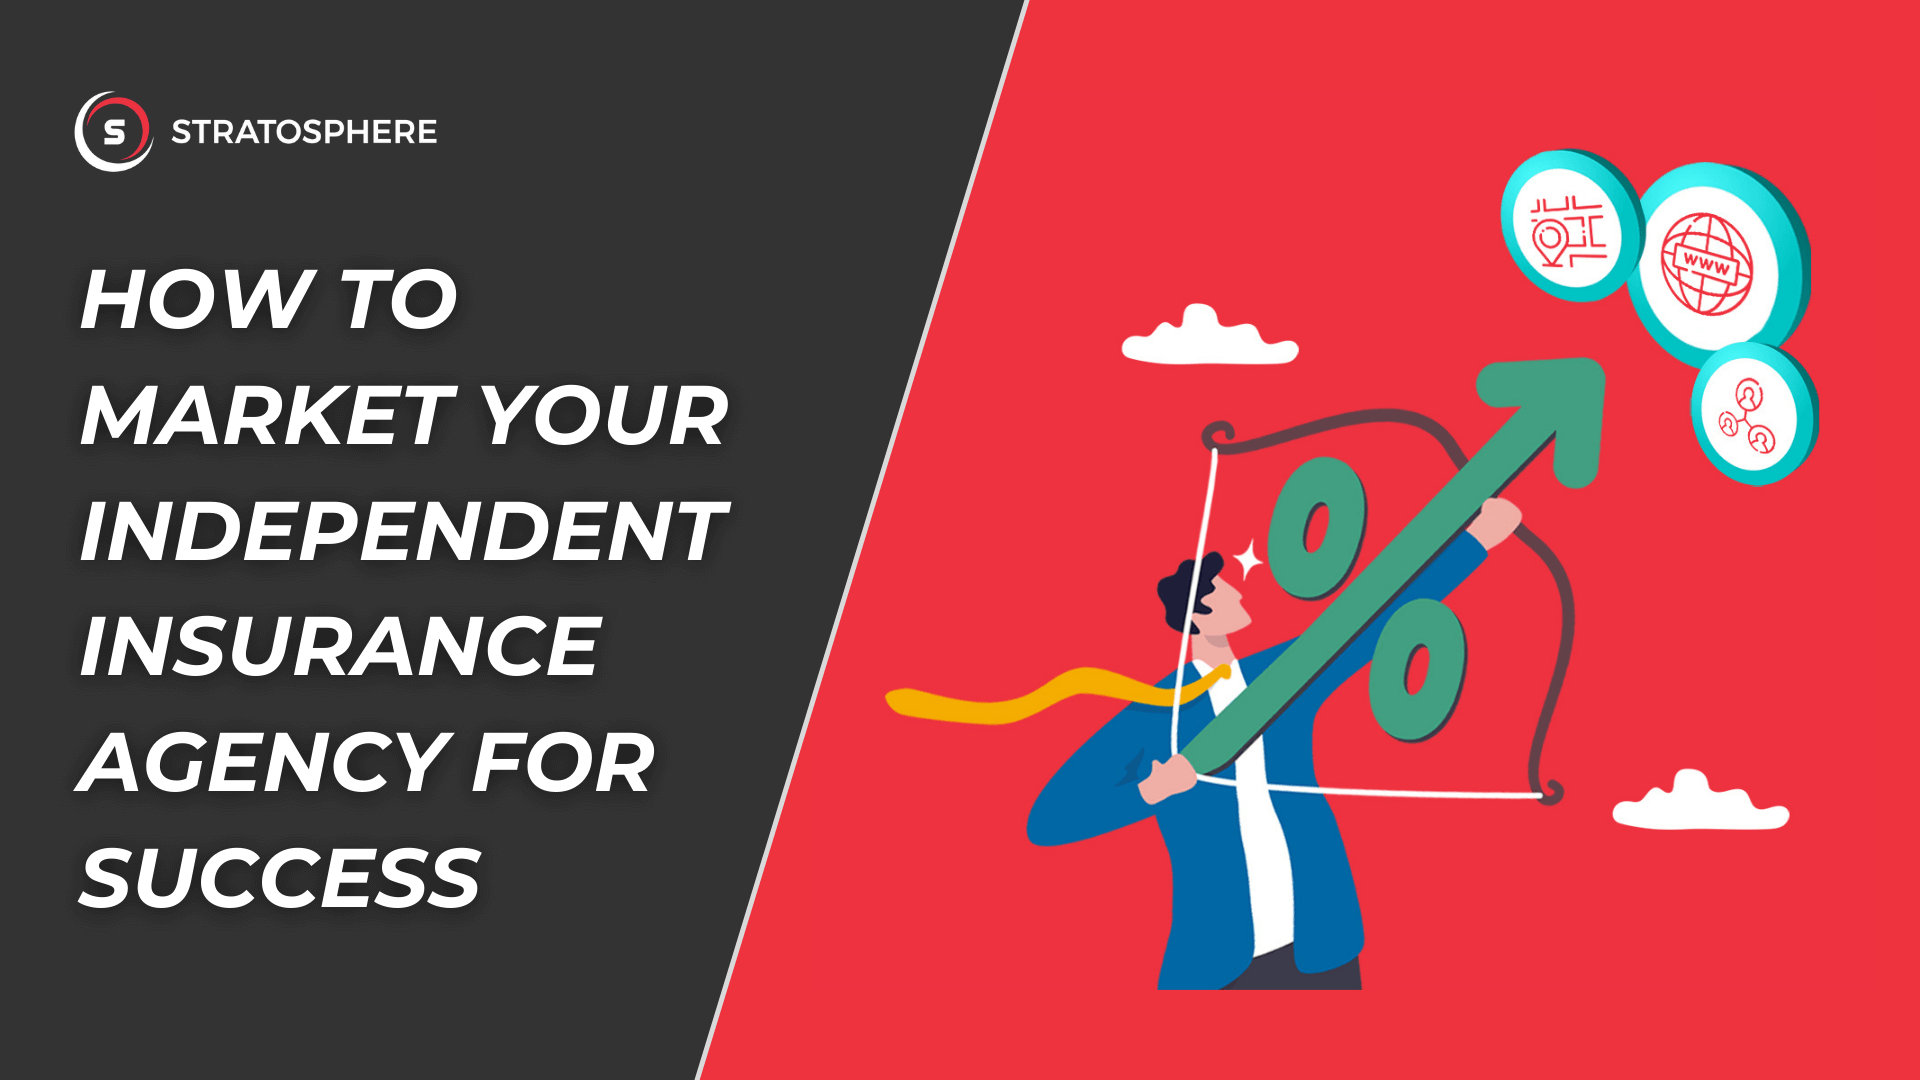 How to Market Your Independent Insurance Agency for Success